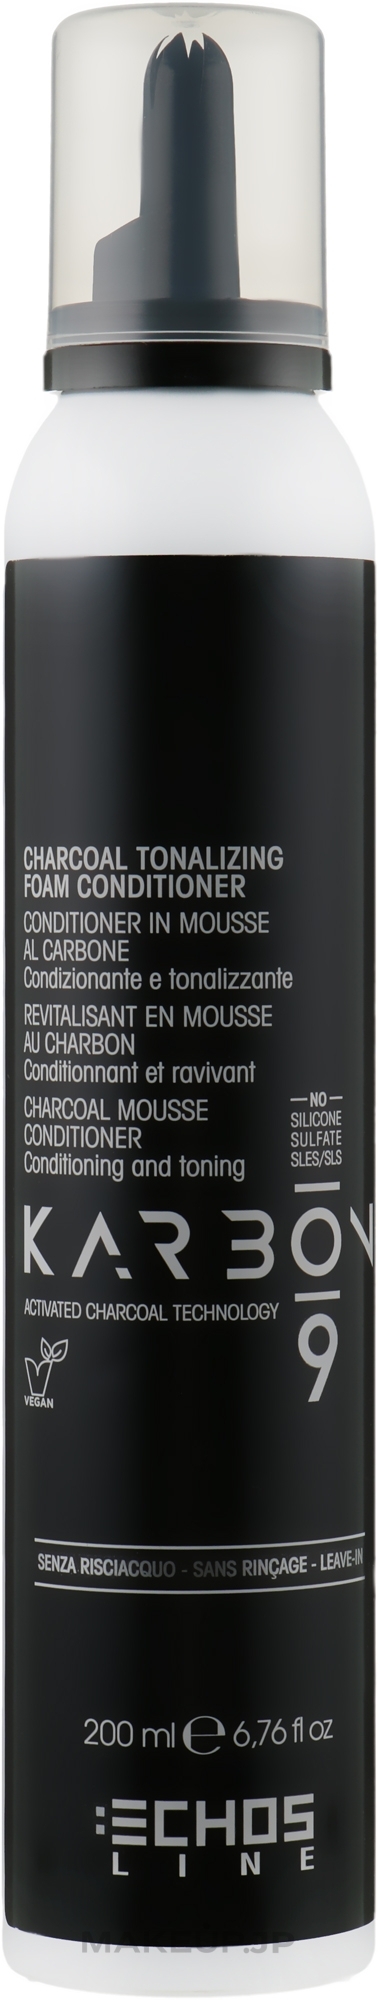 Toning Foam Conditioner with Activated Charcoal - Echosline Karbon 9 Charcoal Tonalizing Foam Conditioner — photo 200 ml